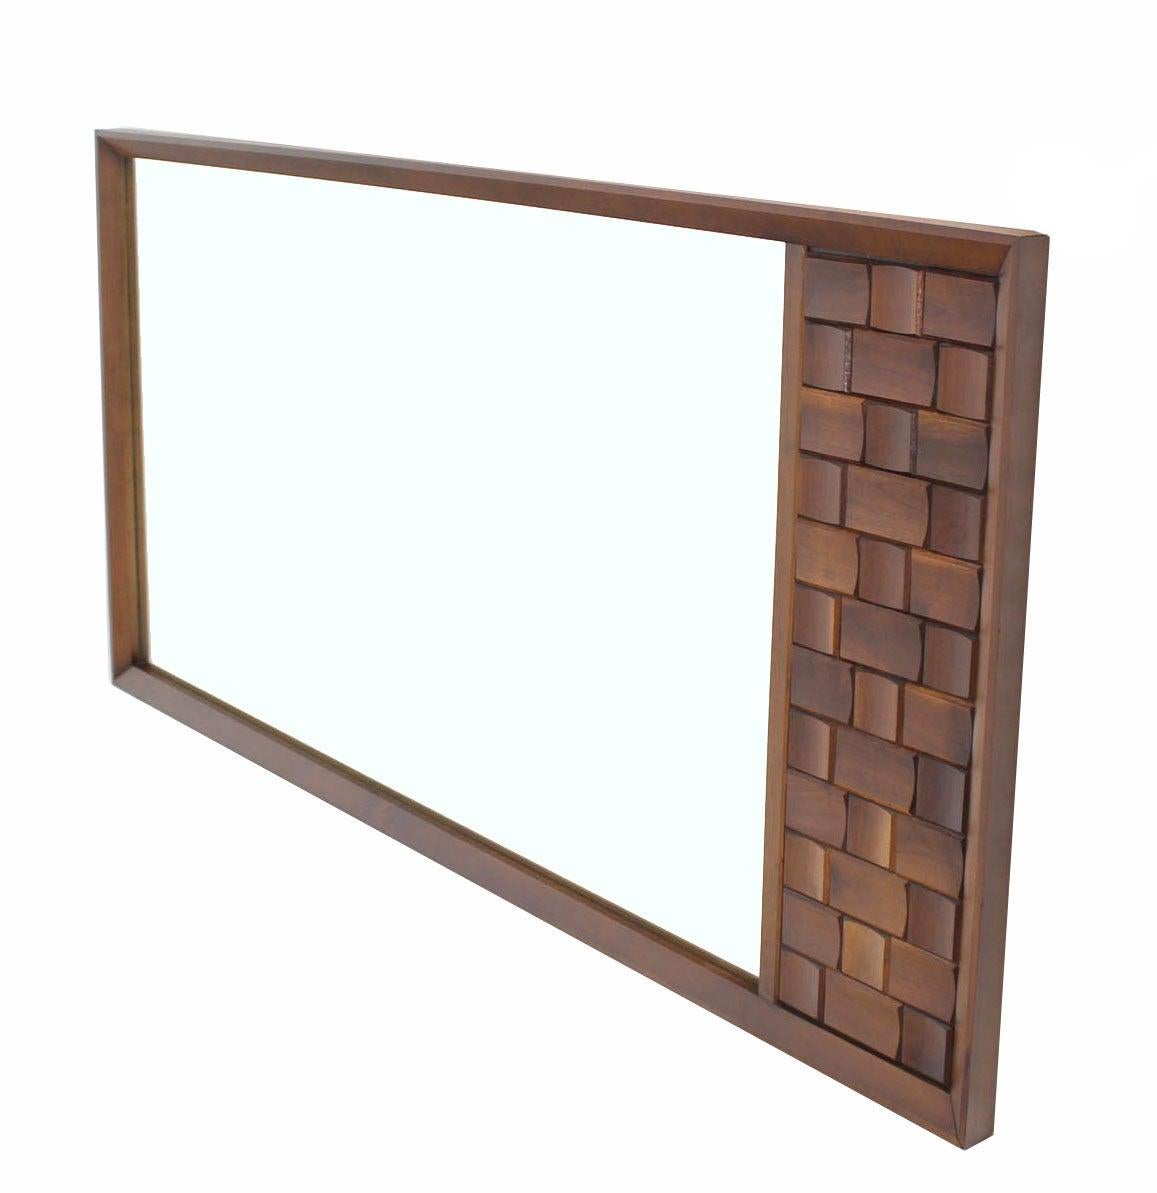 Nice large vintage mid-century modern mirror with solid walnut decorative carving panel.
Inspected vintage condition.